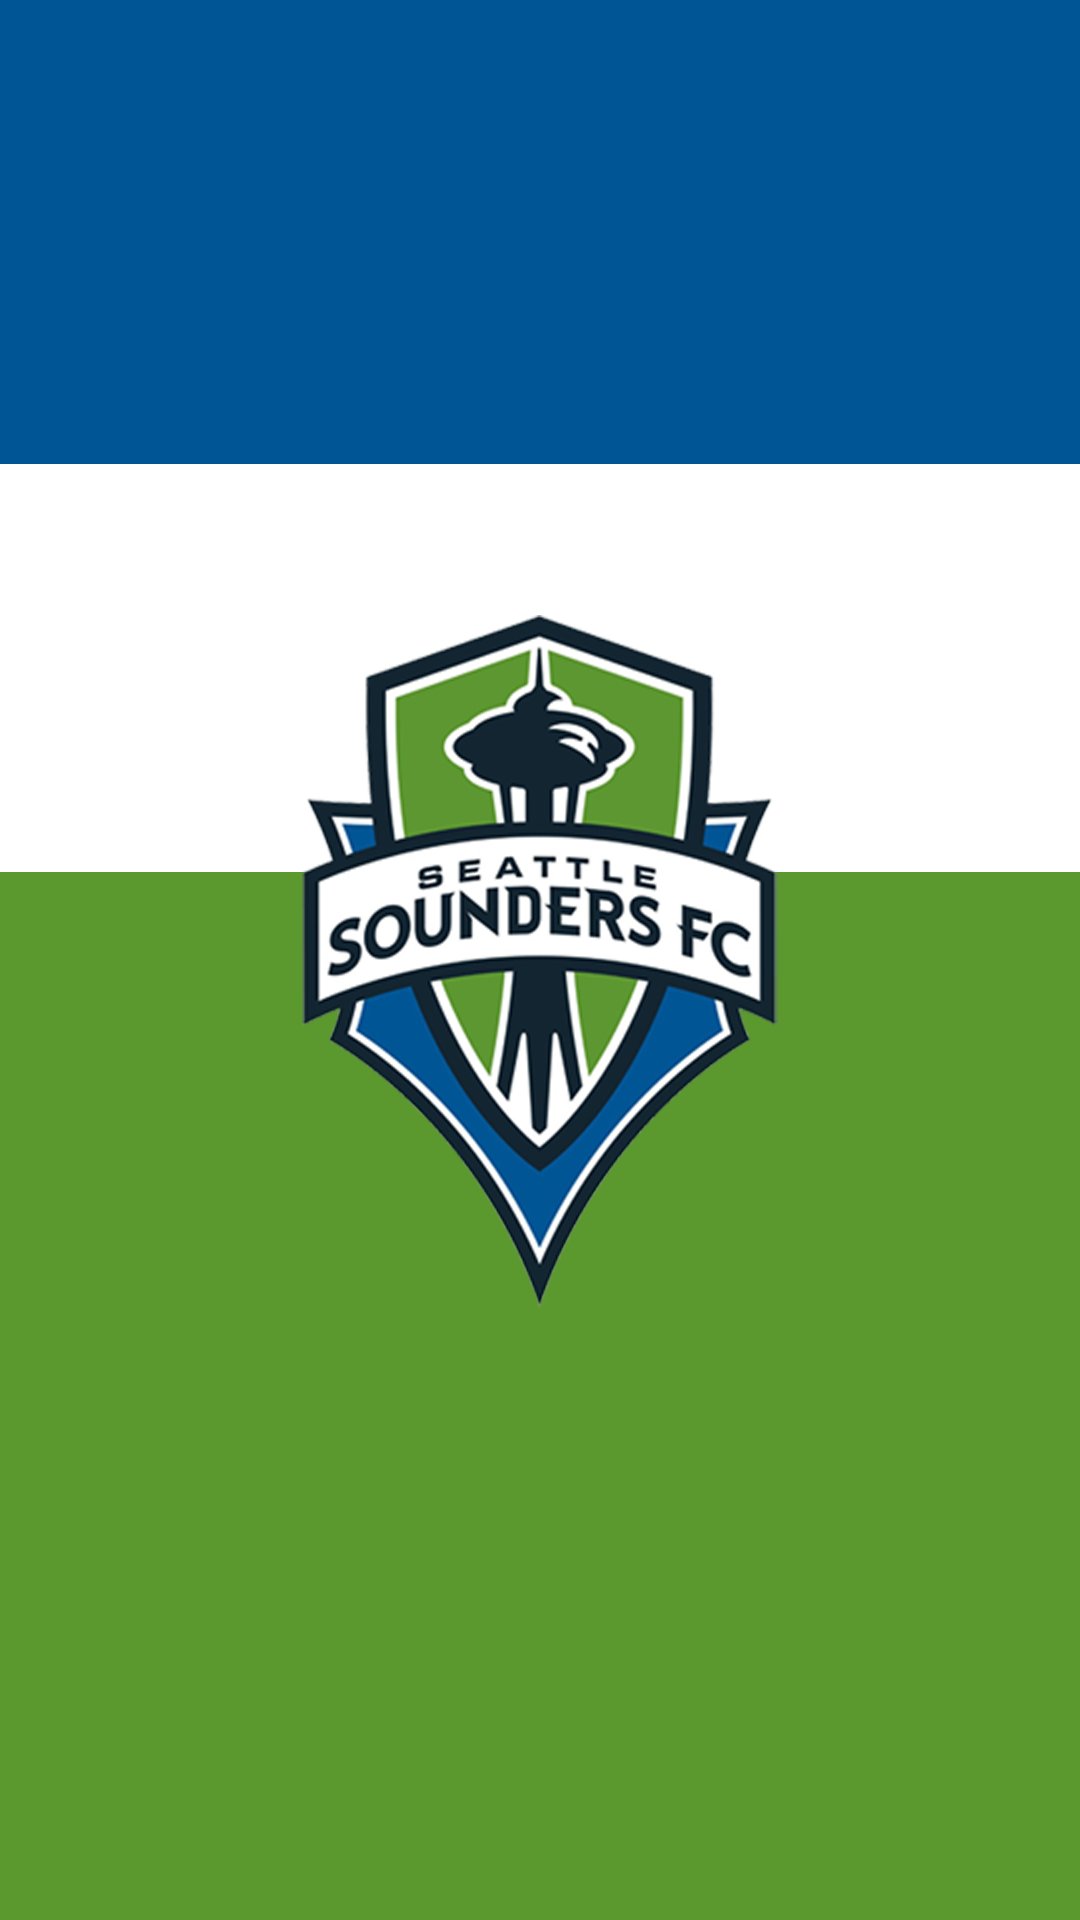 Top 6 Seattle Sounders FC iphone Wallpapers - Best Iphone Wallpapers